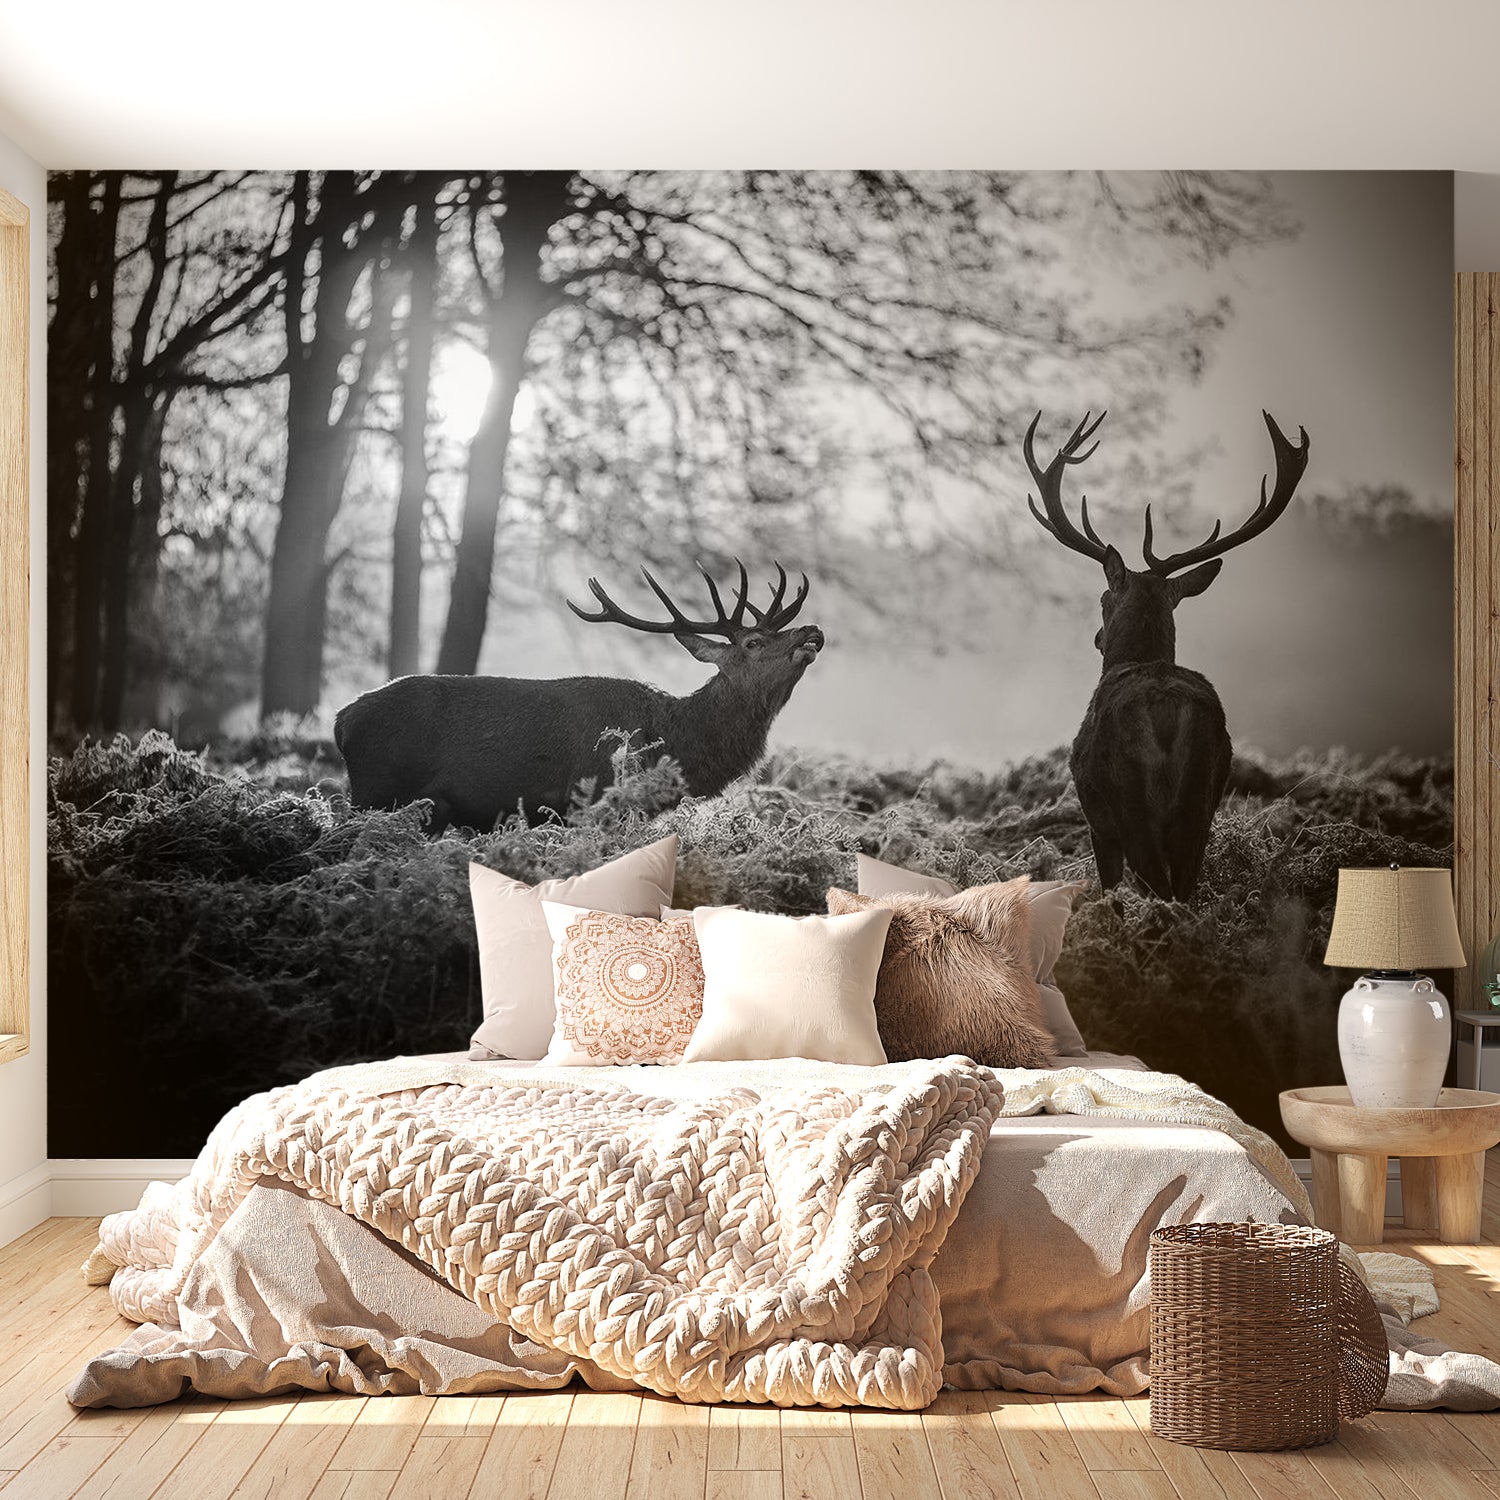 Peel & Stick Animal Wall Mural - Deers In The Morning - Removable Wall Decals